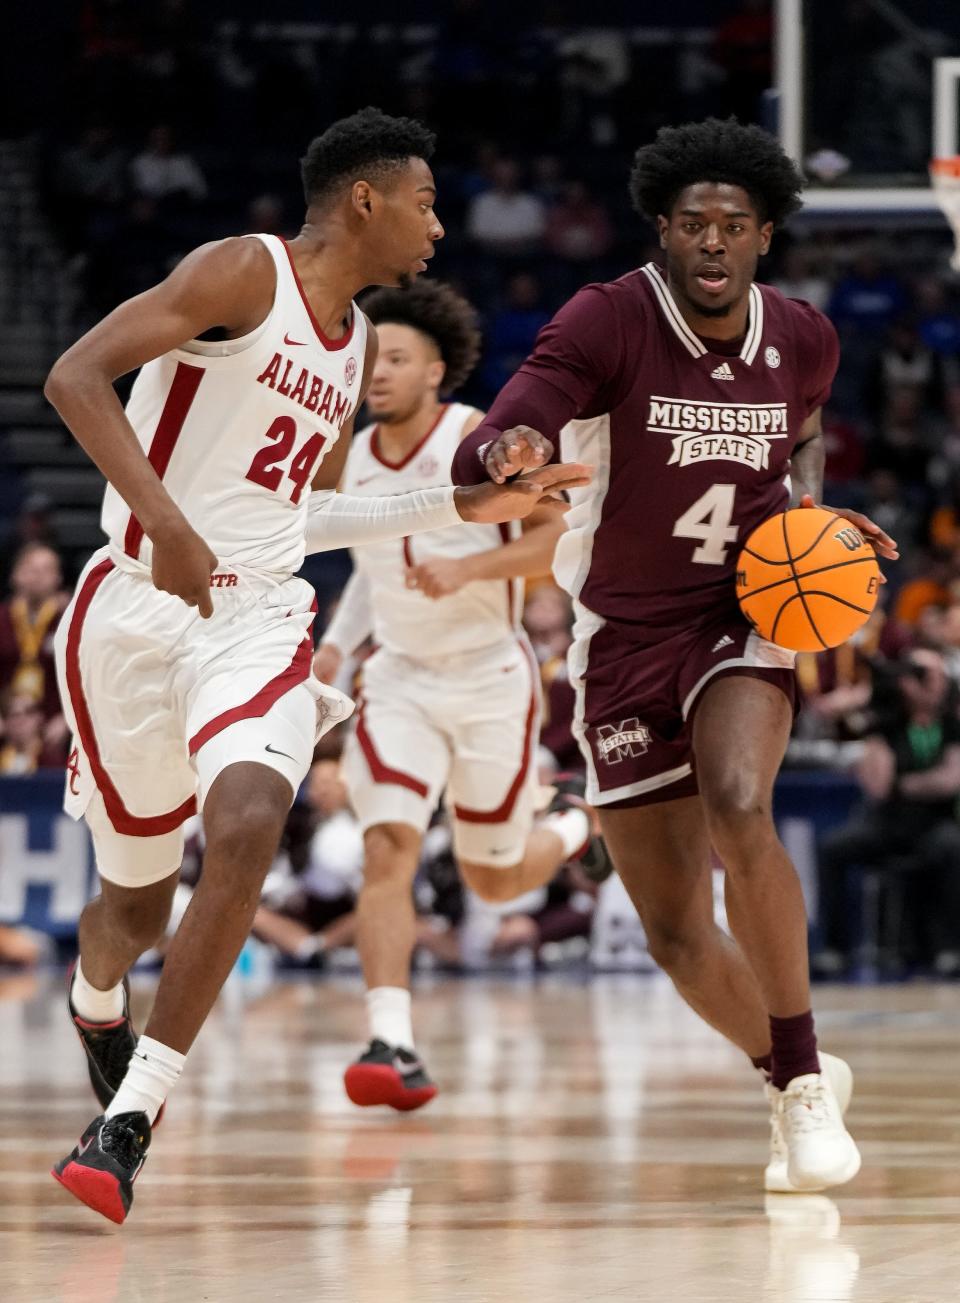 Mississippi State and Cameron Matthews (right) are in the First Four on Tuesday in Dayton, Ohio.